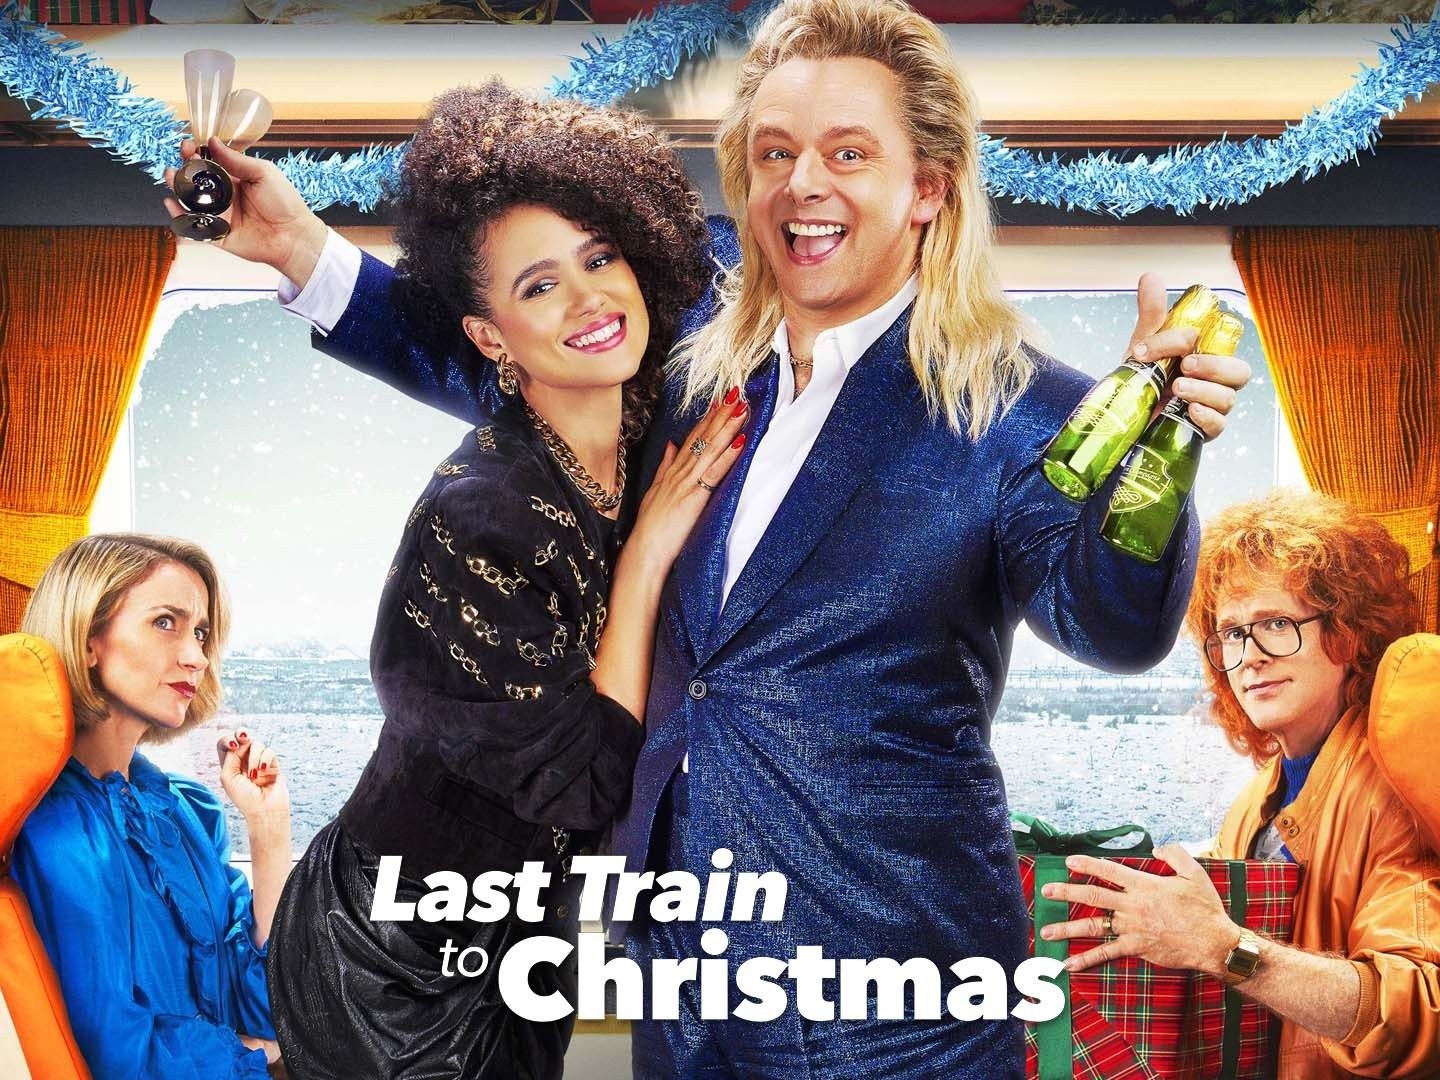 Last Train to Christmas, Watch full free online Last Train to Christmas, See movie Last Train to Christmas full free online, Last Train to Christmas full movie free online, Watch full movie Last Train to Christmas online free, Christmas Movies, See Last Train to Christmas free online movie, See Film See You Next Christmas 2021 Full Free Online, Christmas Collision, Your Christmas Or Mine 2022 full hd, Film Days of Our Lives A Very Salem Christmas 2021, Watch full film Christmas Collision free online, Watch Online Ace and the Christmas Miracle 2021 Full Free, Christmas Collision Movies, A Castle for Christmas 2021, Watch Movie Christmas Bloody Christmas 2022 Full Free Online, Watch Cloudy with a Chance of Christmas 2022 full movie free online, Watch film Christmas Collision free online, See Movies A Rich Christmas 2021 Full Free Online, 8-Bit Christmas